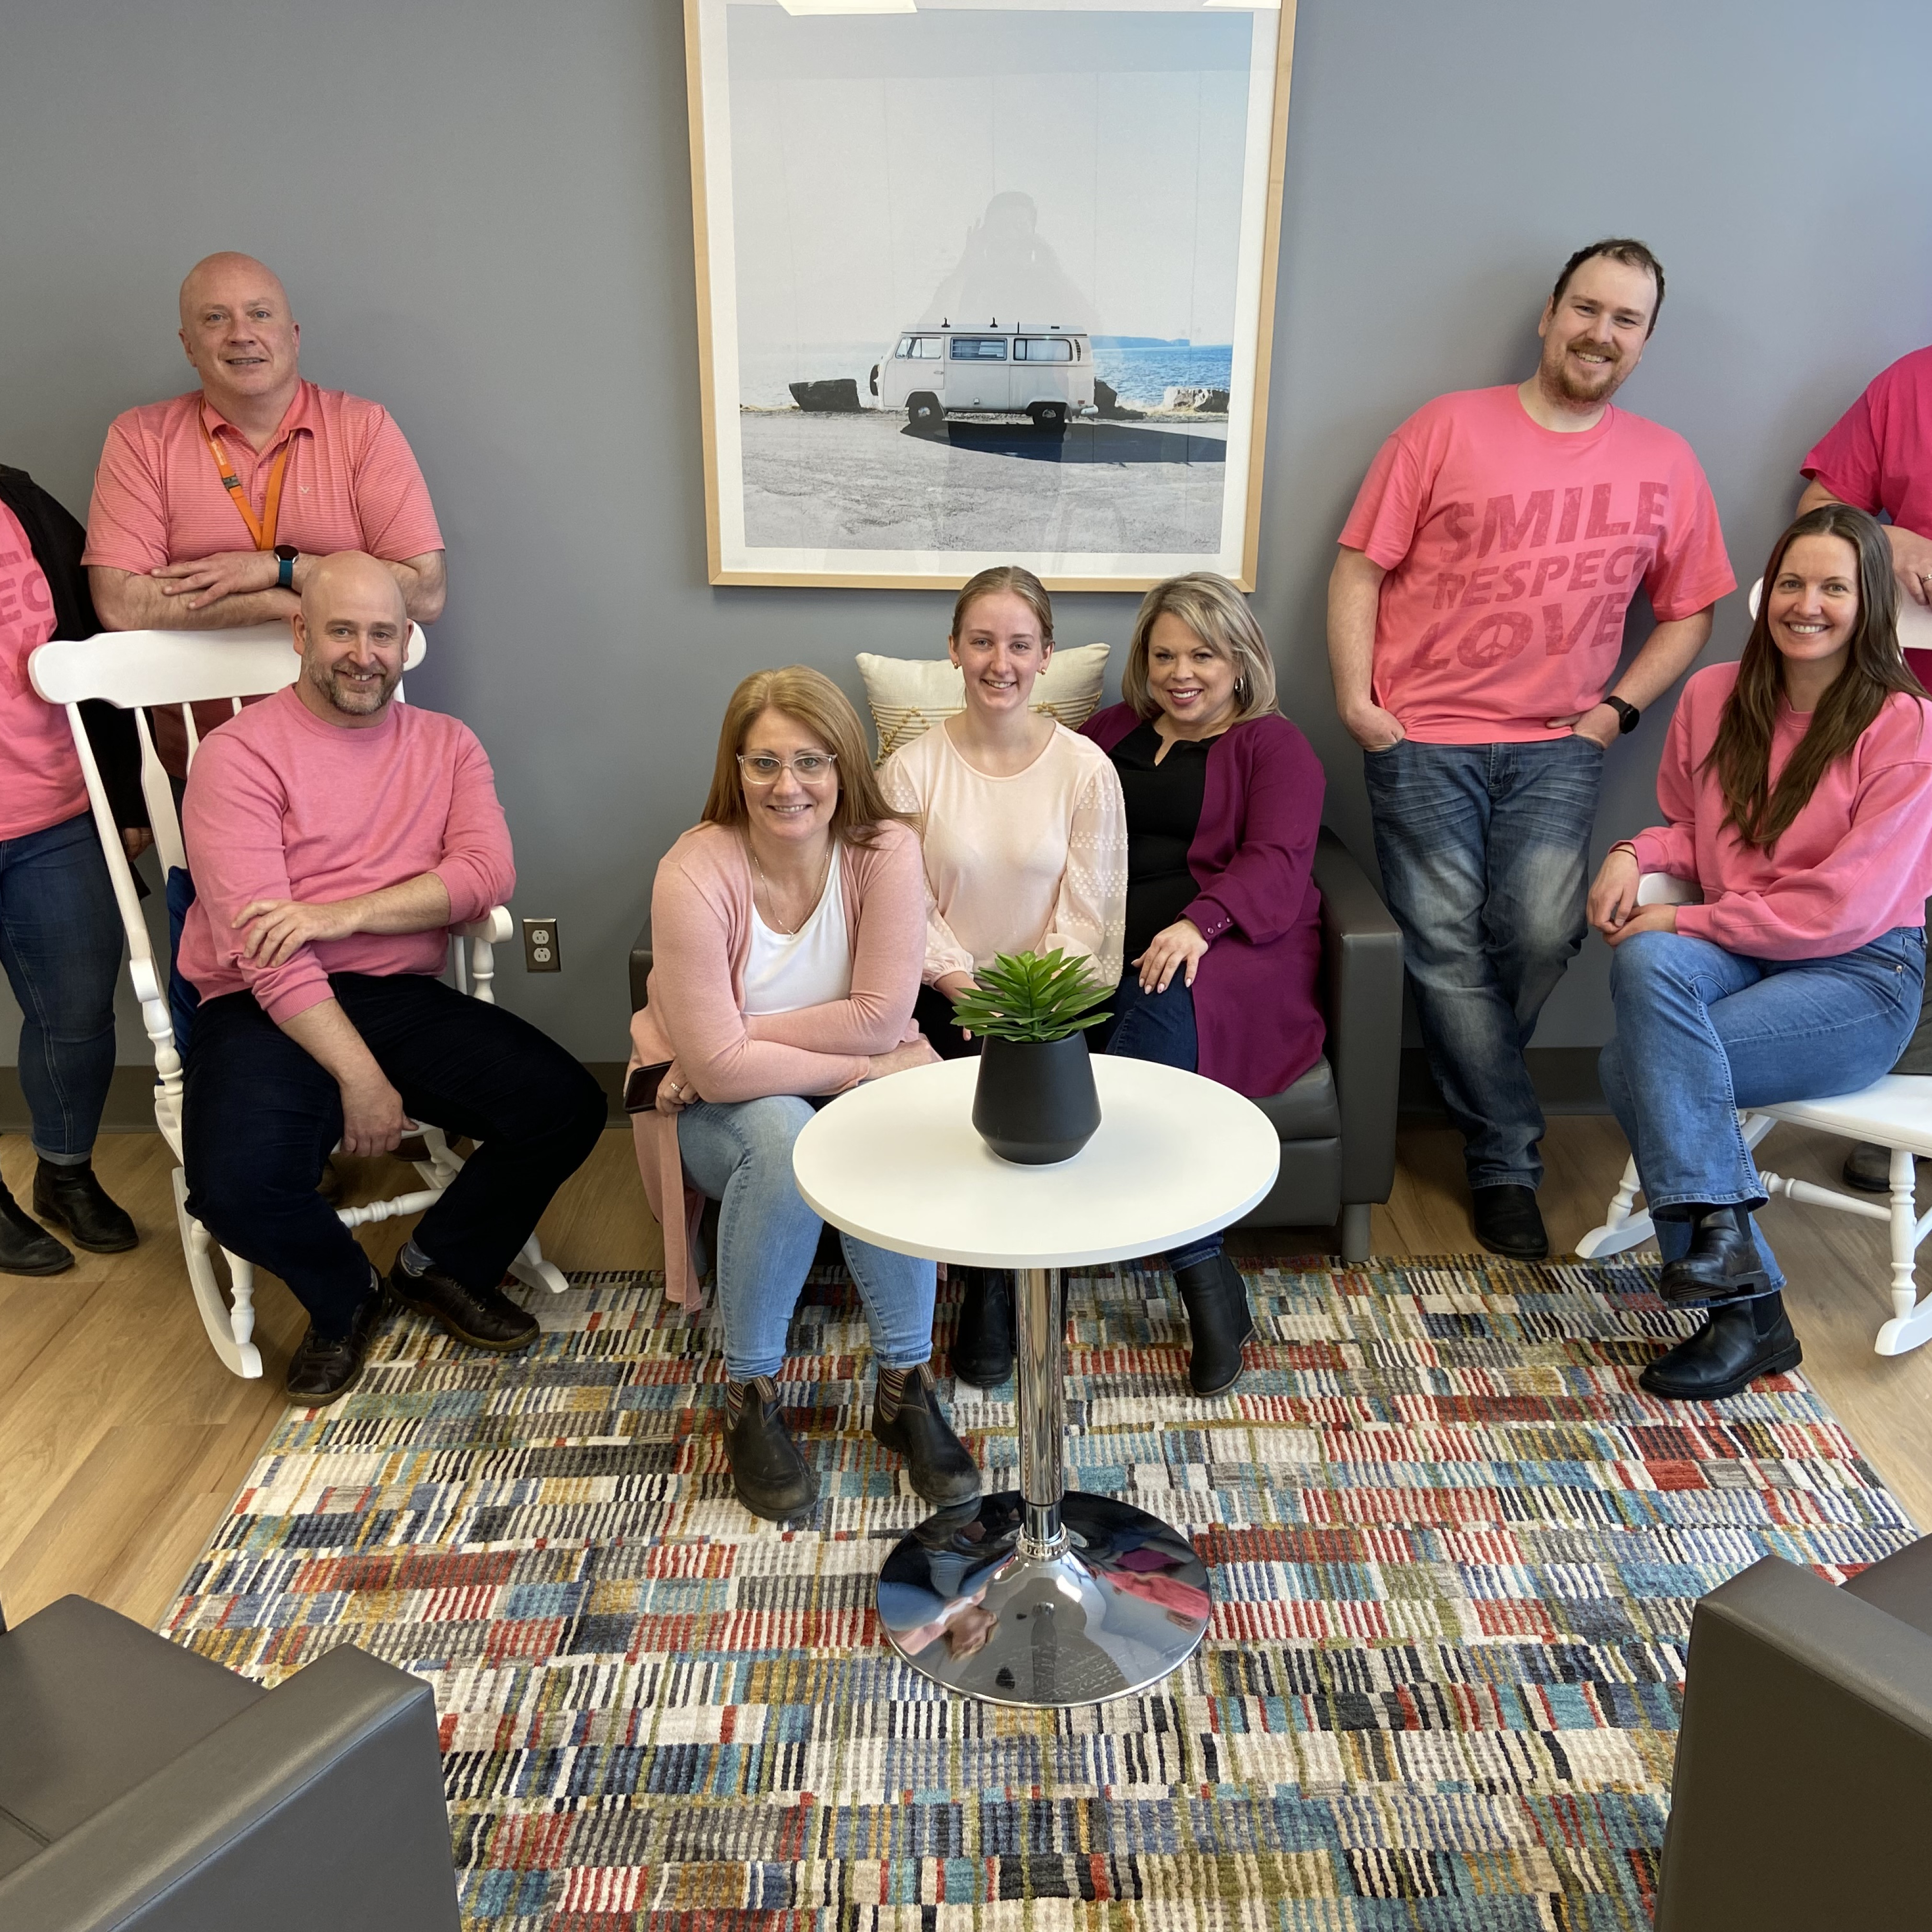 Our team sits together smiling for the camera in pink shirts.